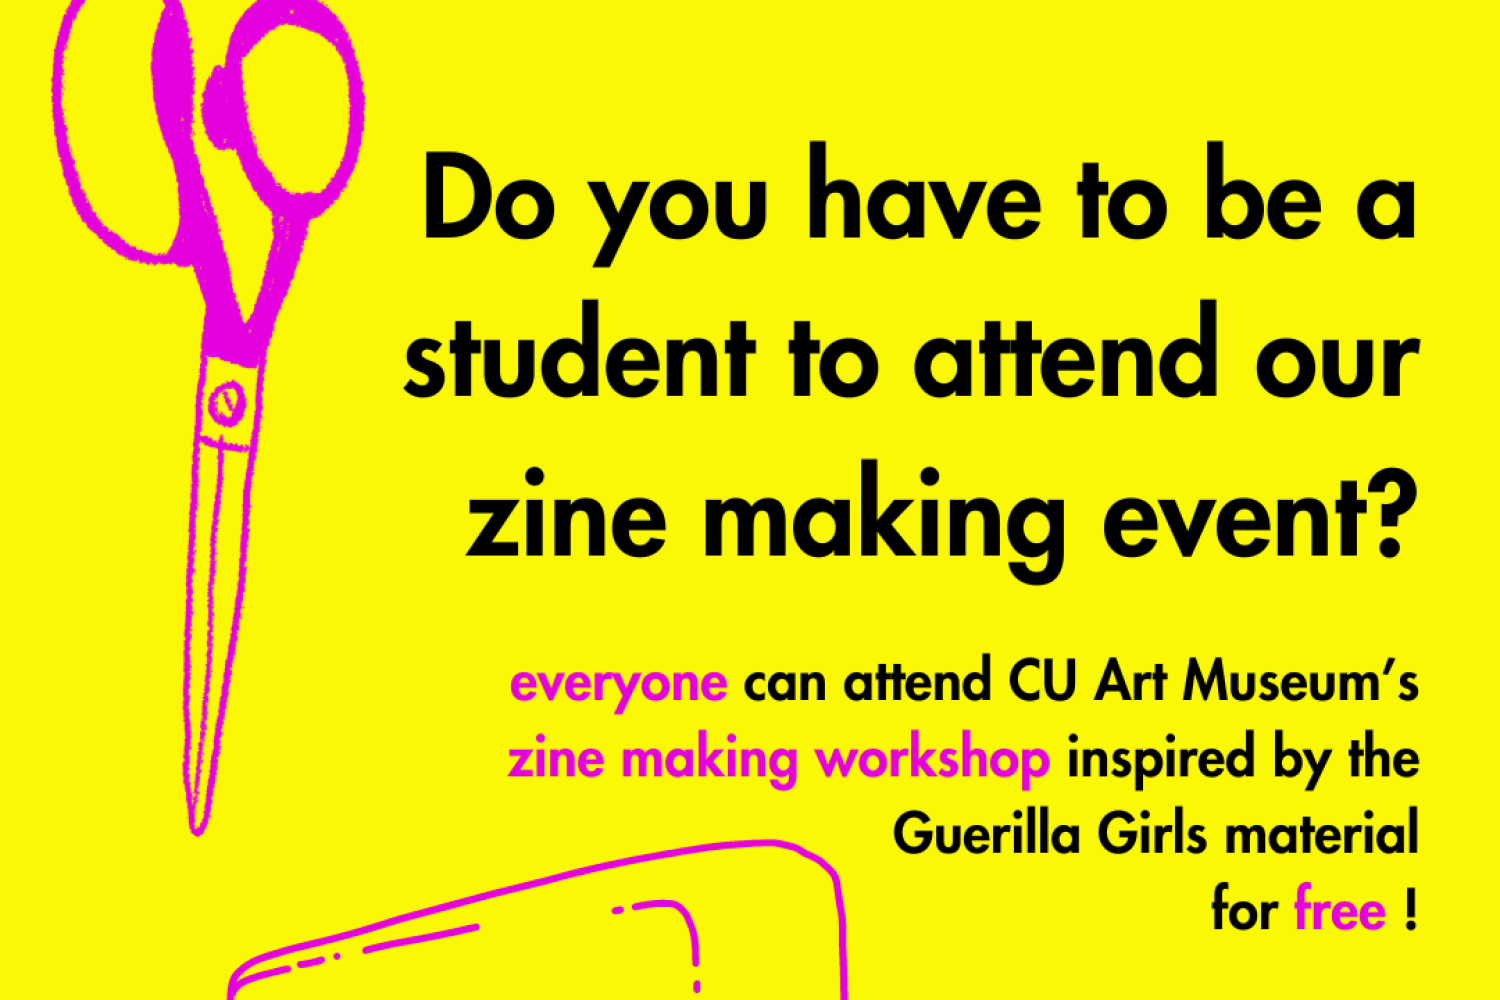 Black and fuschia text on a yellow background reads, "Do you have to be a student to attend our zine making event? Everyone can attend CU Art Museum's zine making workshop inspired by Guerilla Girls material for free!" The text is surrounded by fuschia-colored art supplies, including scissors and a stapler.